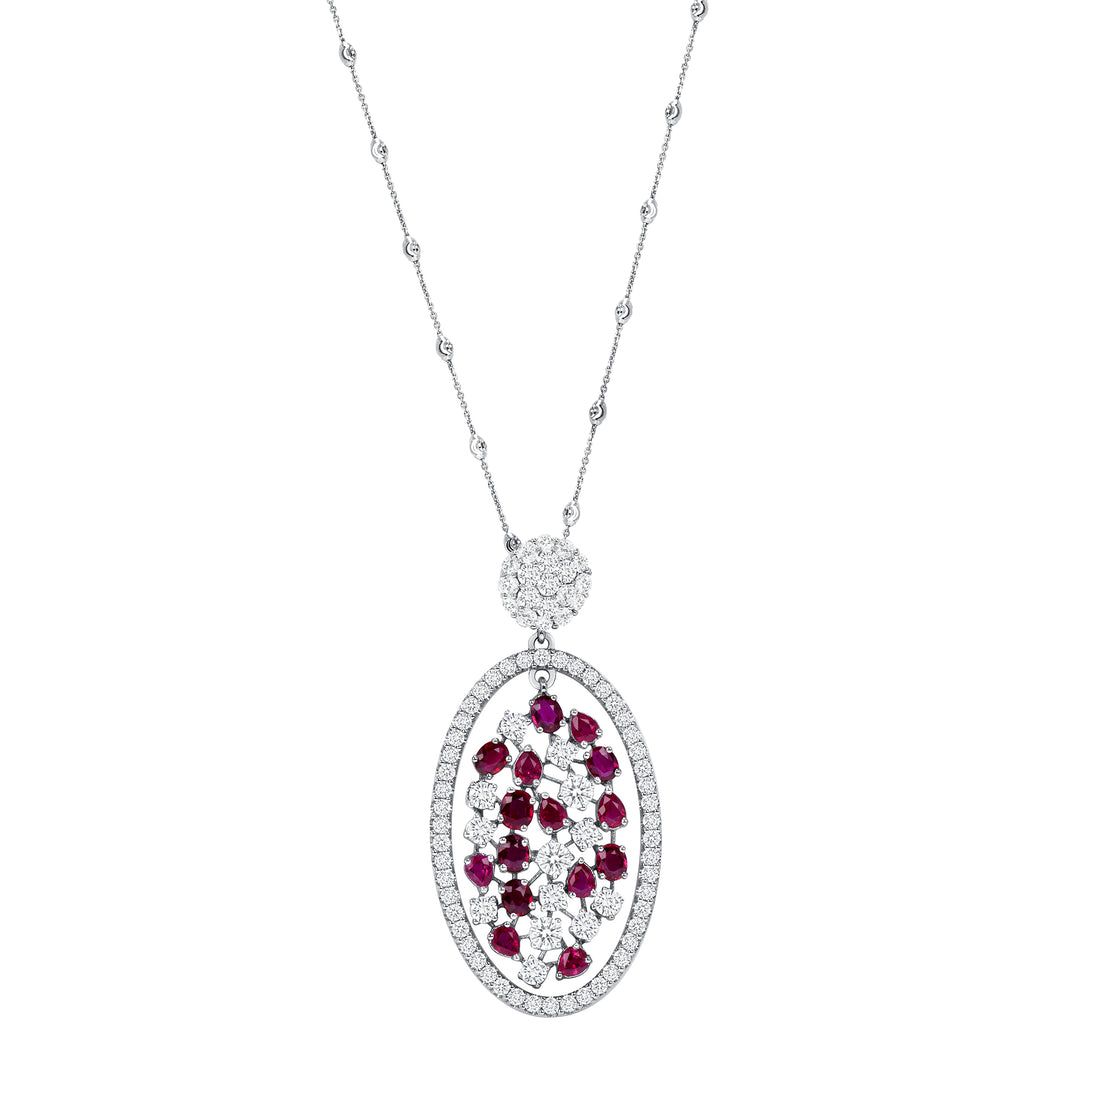 Diamond and Mixed-cut Ruby Pendant Necklace